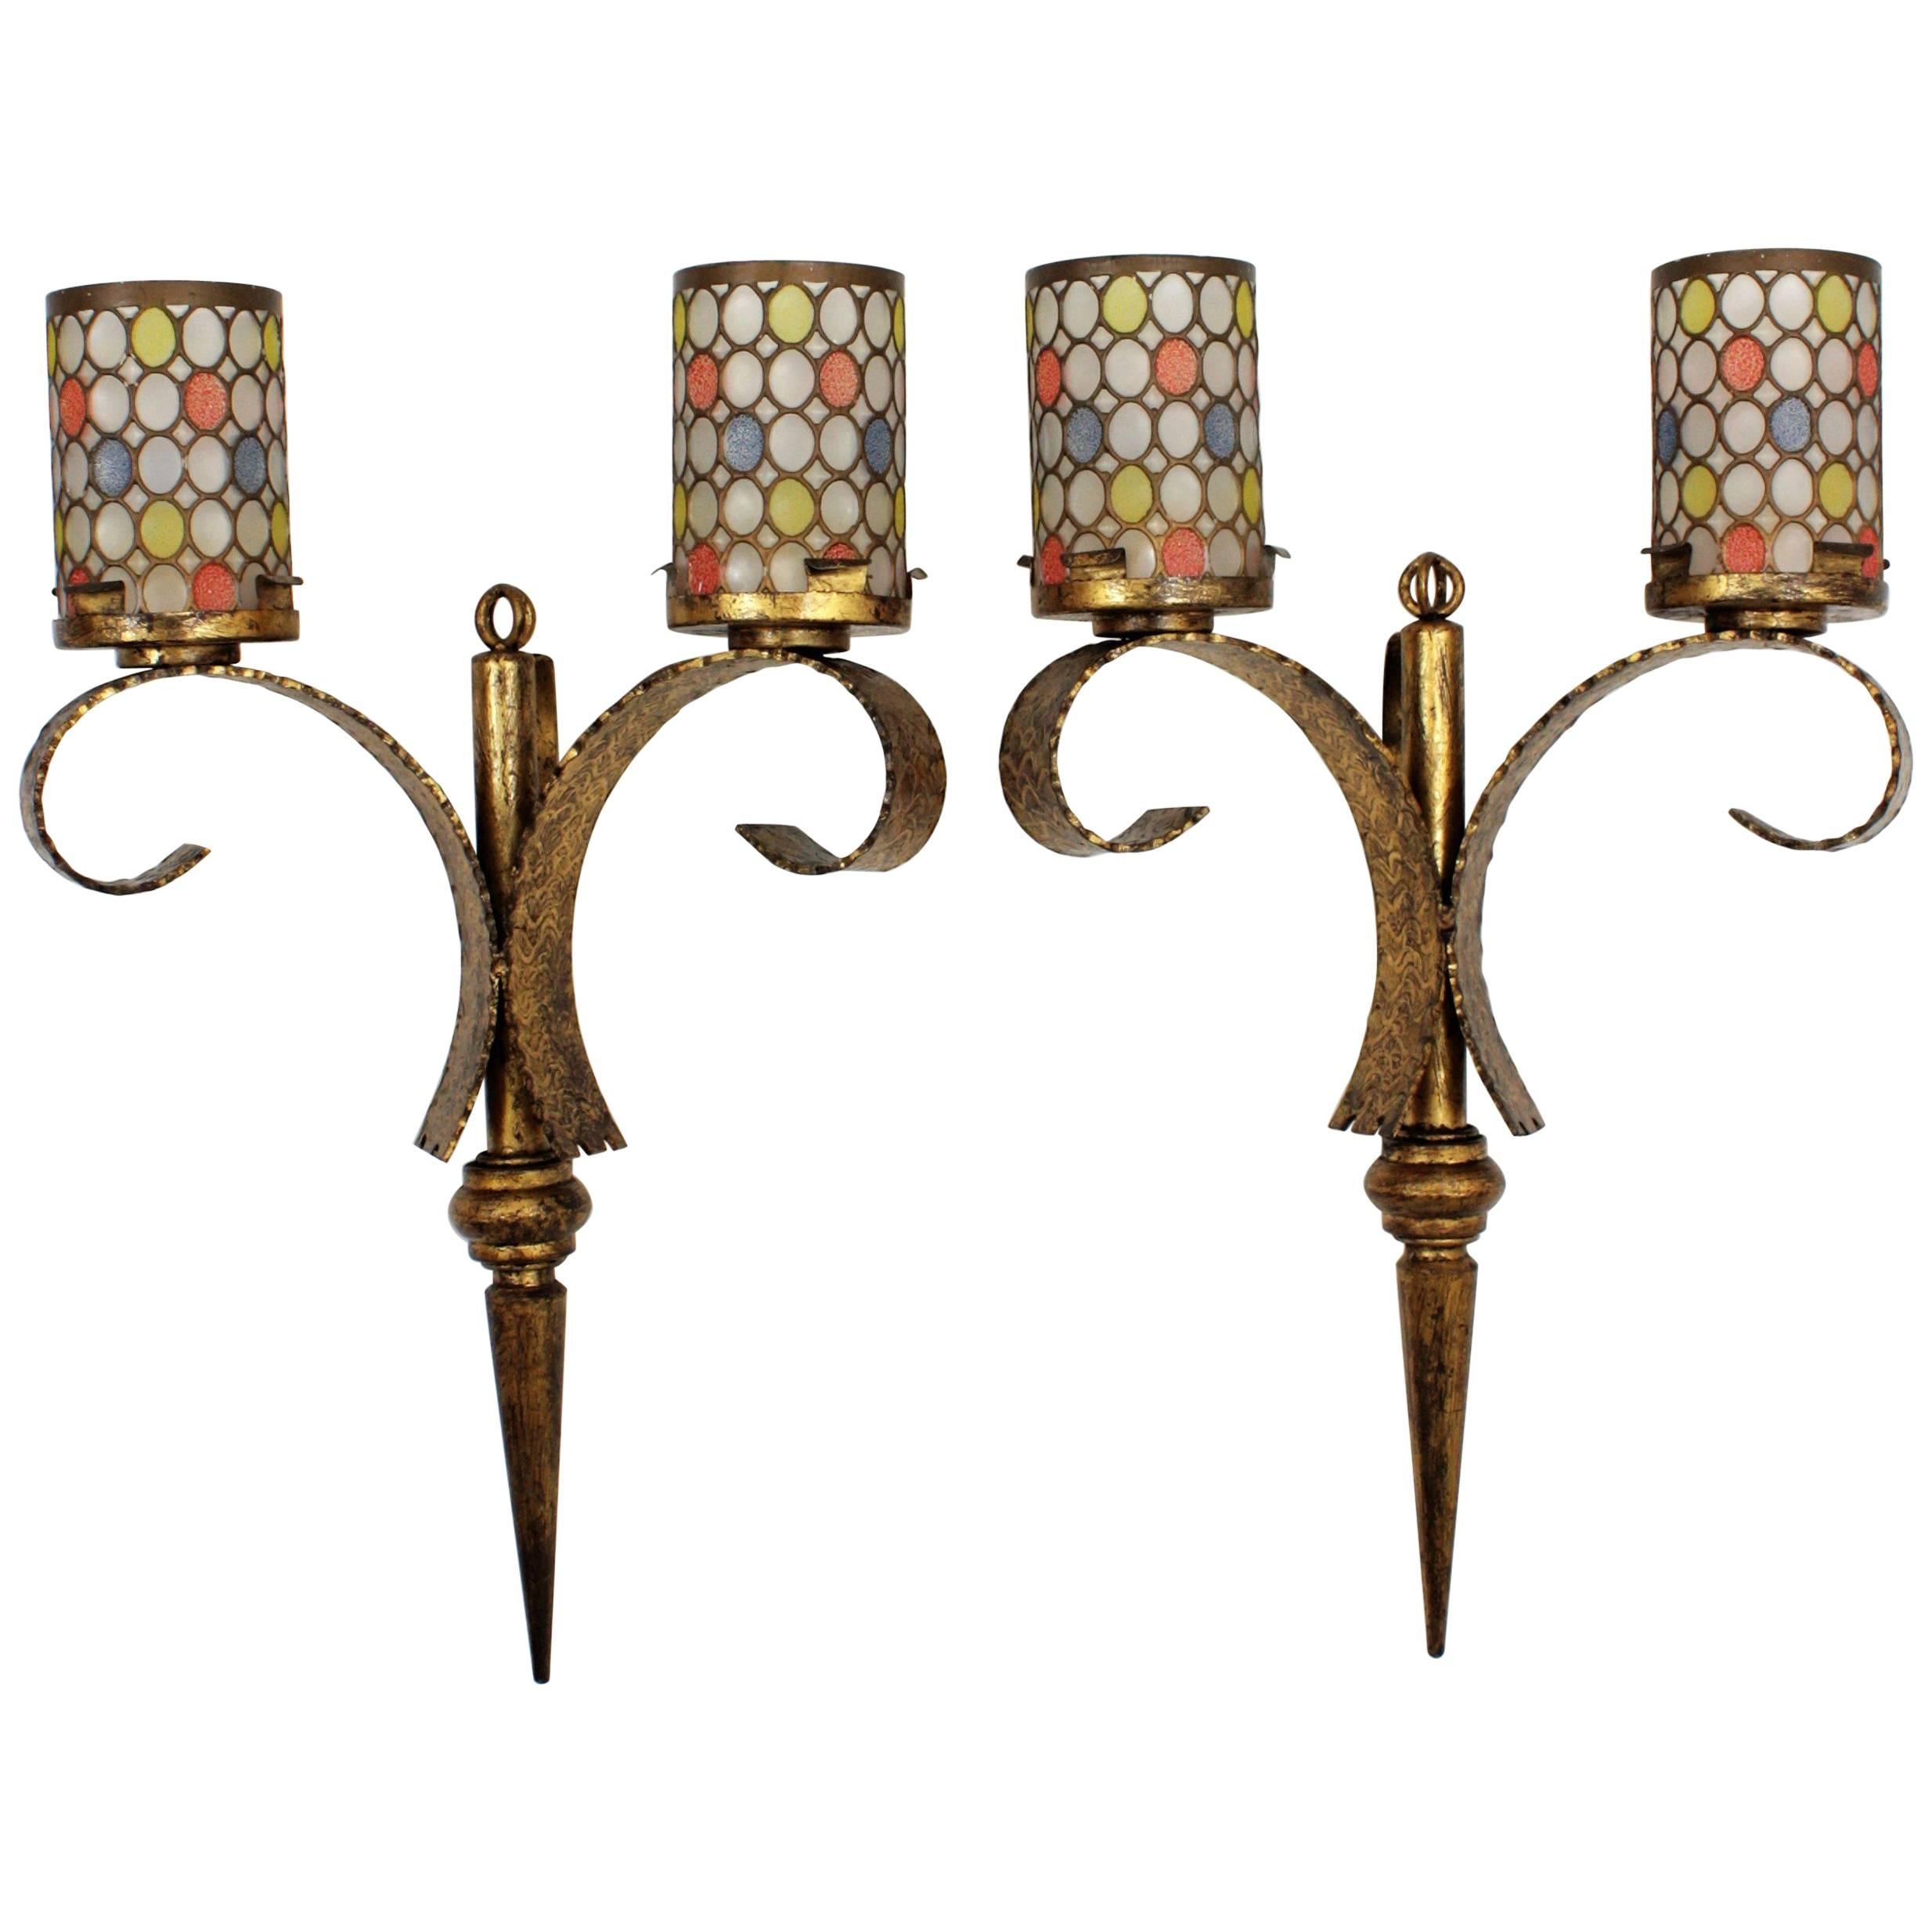 Pair of Huge Mid-Century Modern Gilt Iron Wall Lights with Colorful Glass Shades